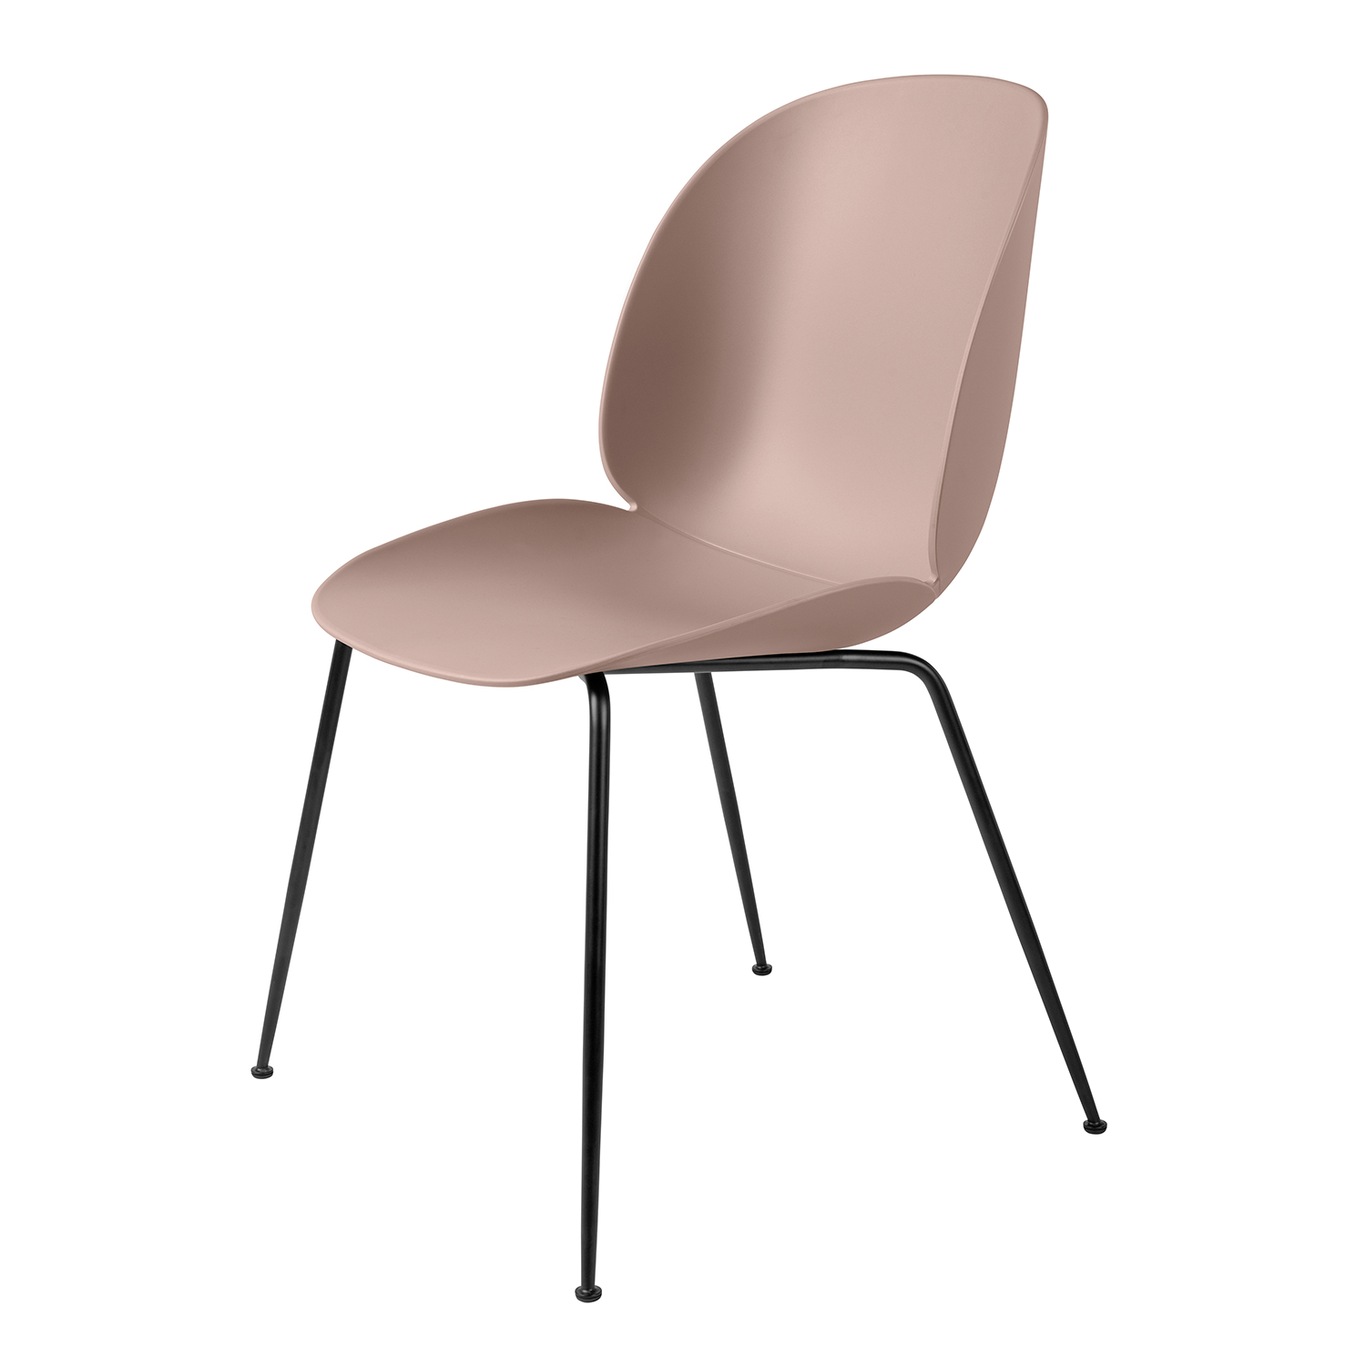 Beetle Dining Chair Un-upholstered, Conic Base Black, Sweet Pink